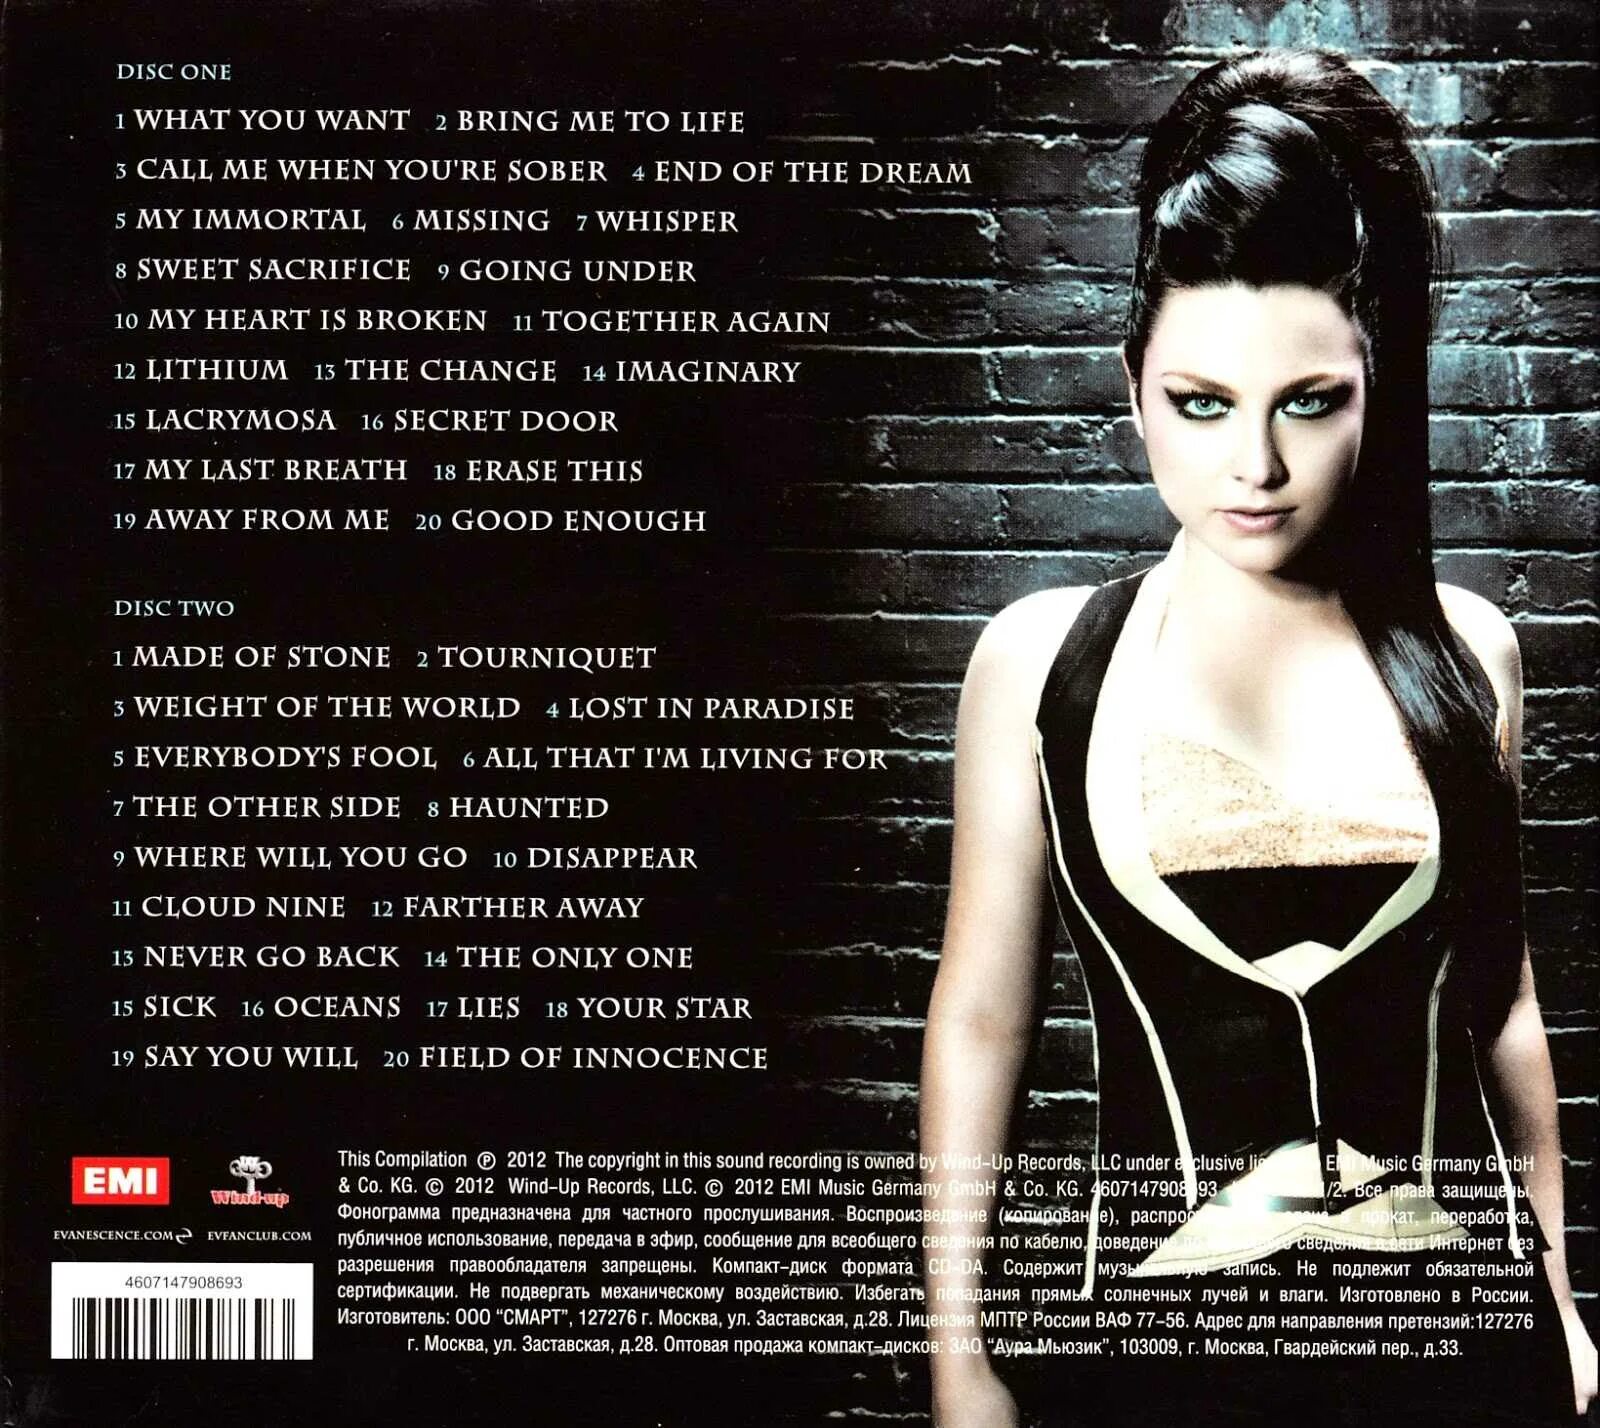 Call me when you high. Evanescence CD. Evanescence Greatest Hits 2012. Альбом Evanescence the best. Кассеты эванесенс.